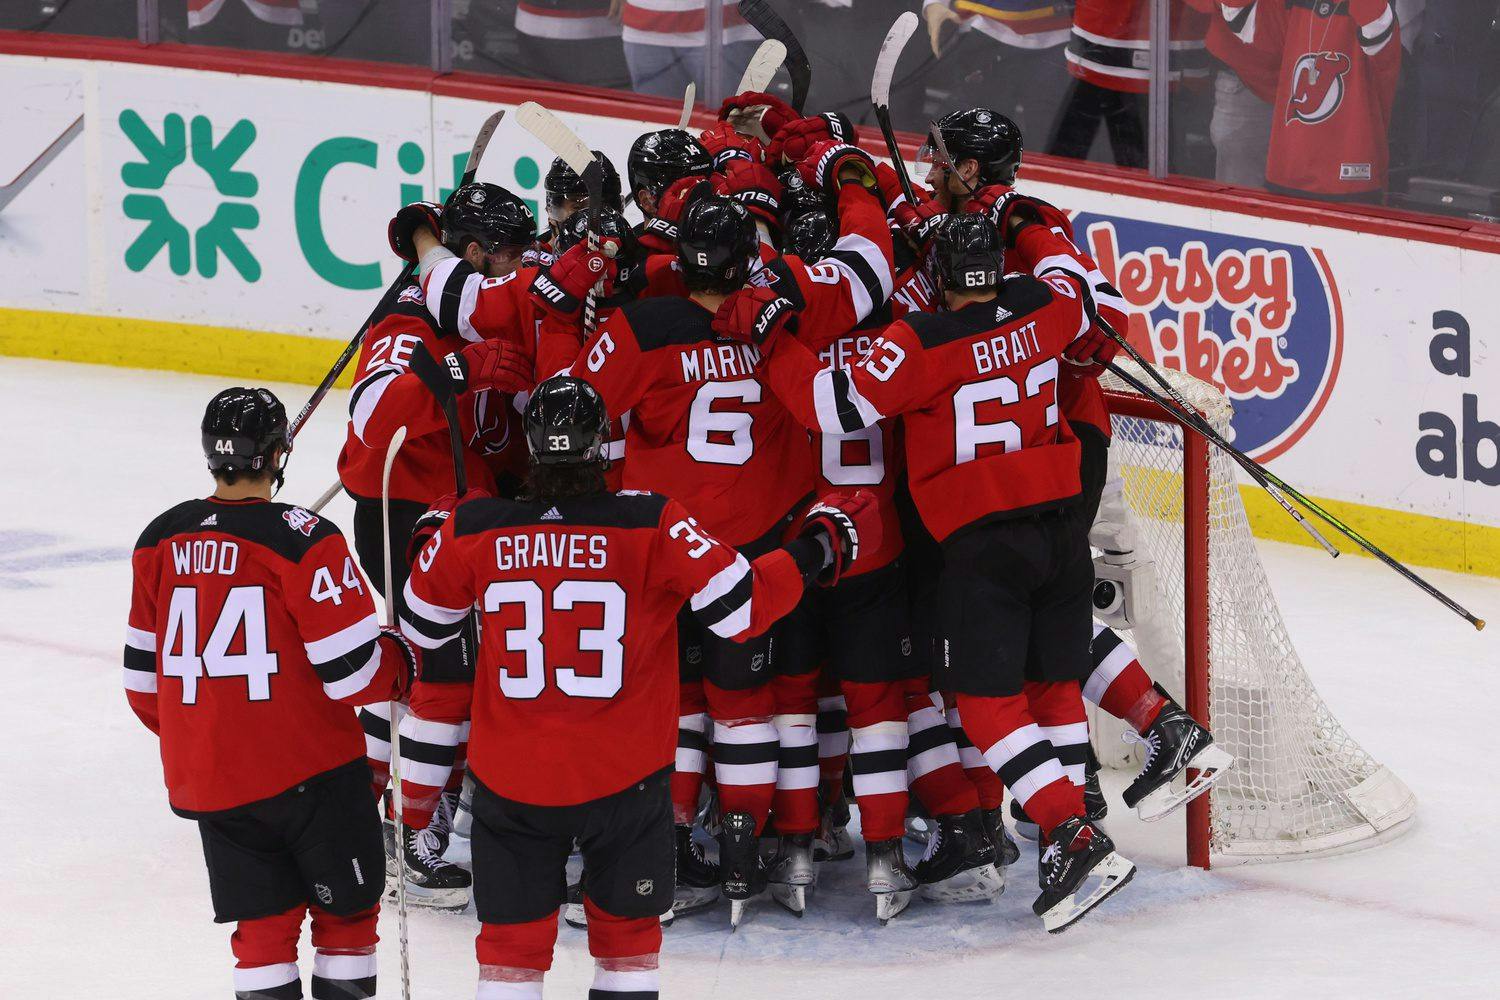 N.J. Devils heading into 2023-24 season with Stanley Cup aspirations